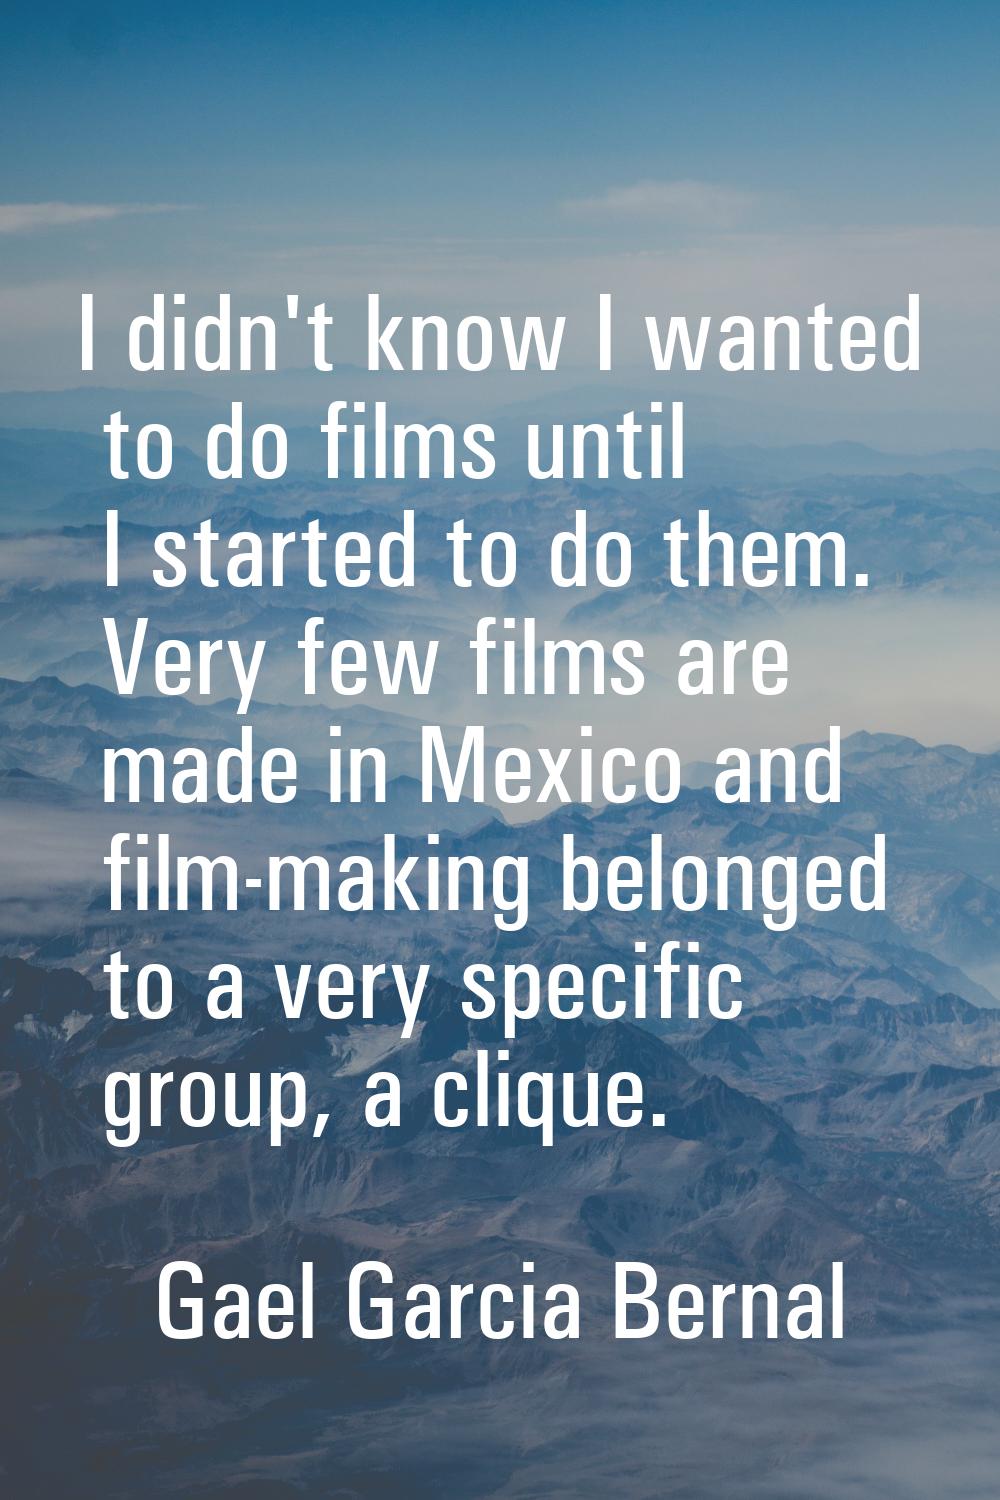 I didn't know I wanted to do films until I started to do them. Very few films are made in Mexico an